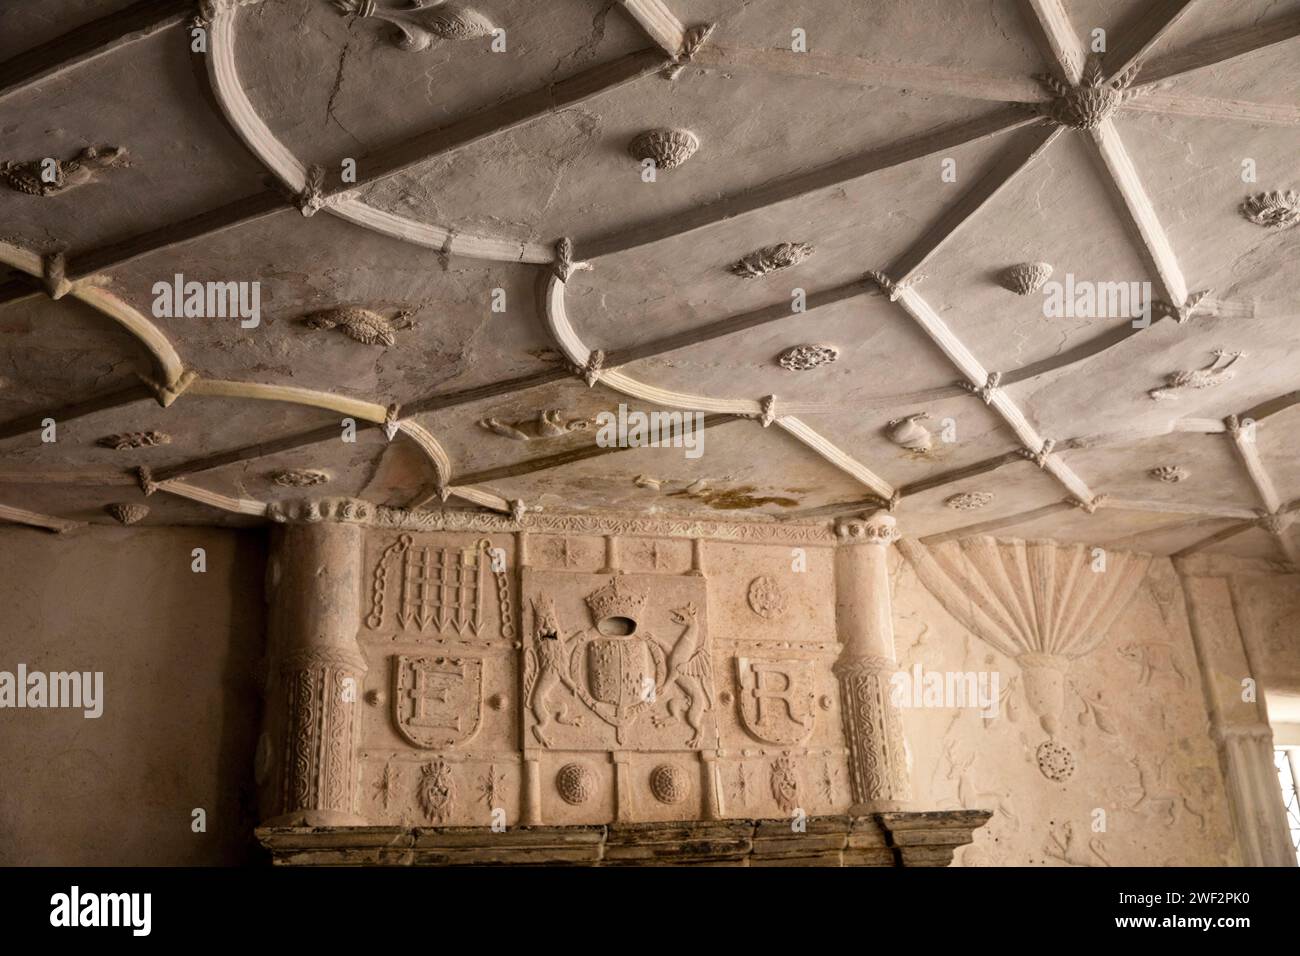 UK, Wales, Gwynedd, Conwy (Conway), town centre, C16th Plas Mawr, parlour, plaster fireplace decoration and ornate ceiling Stock Photo